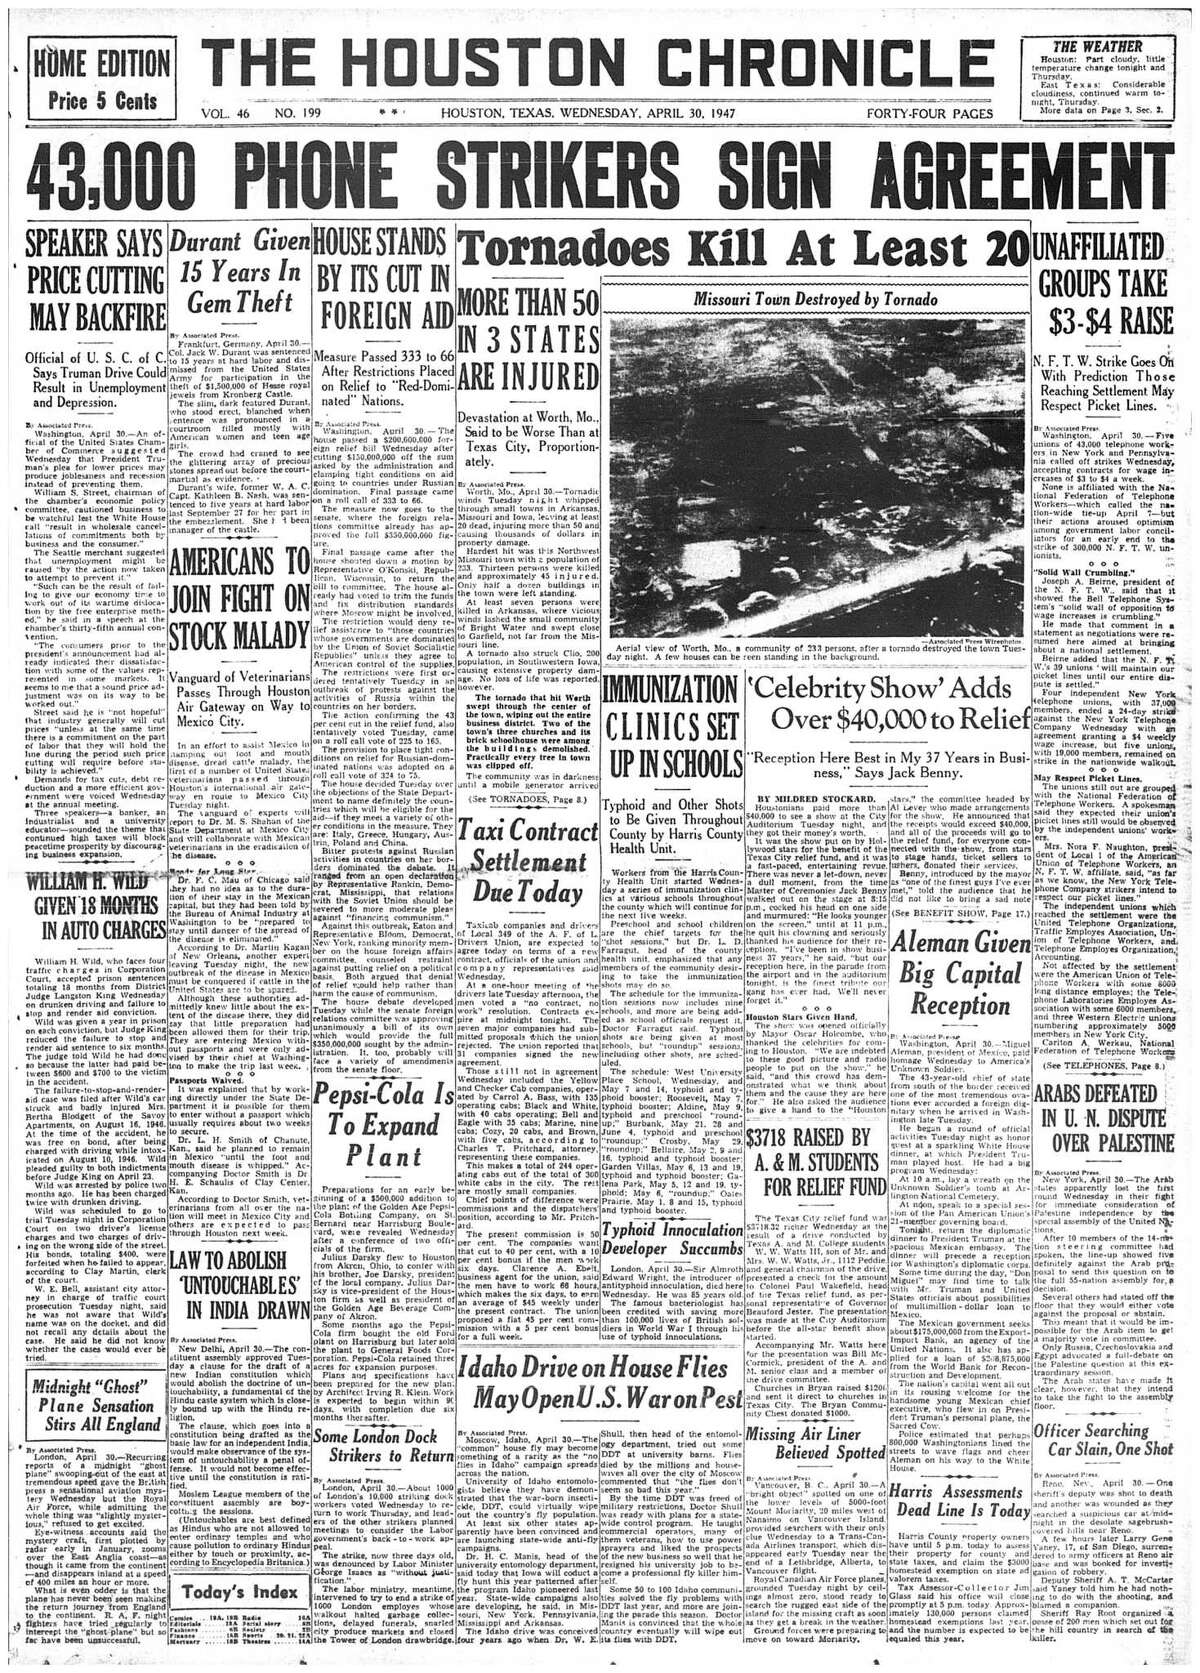 Houston Chronicle front page - April 30, 1947 - section 1, page 1.